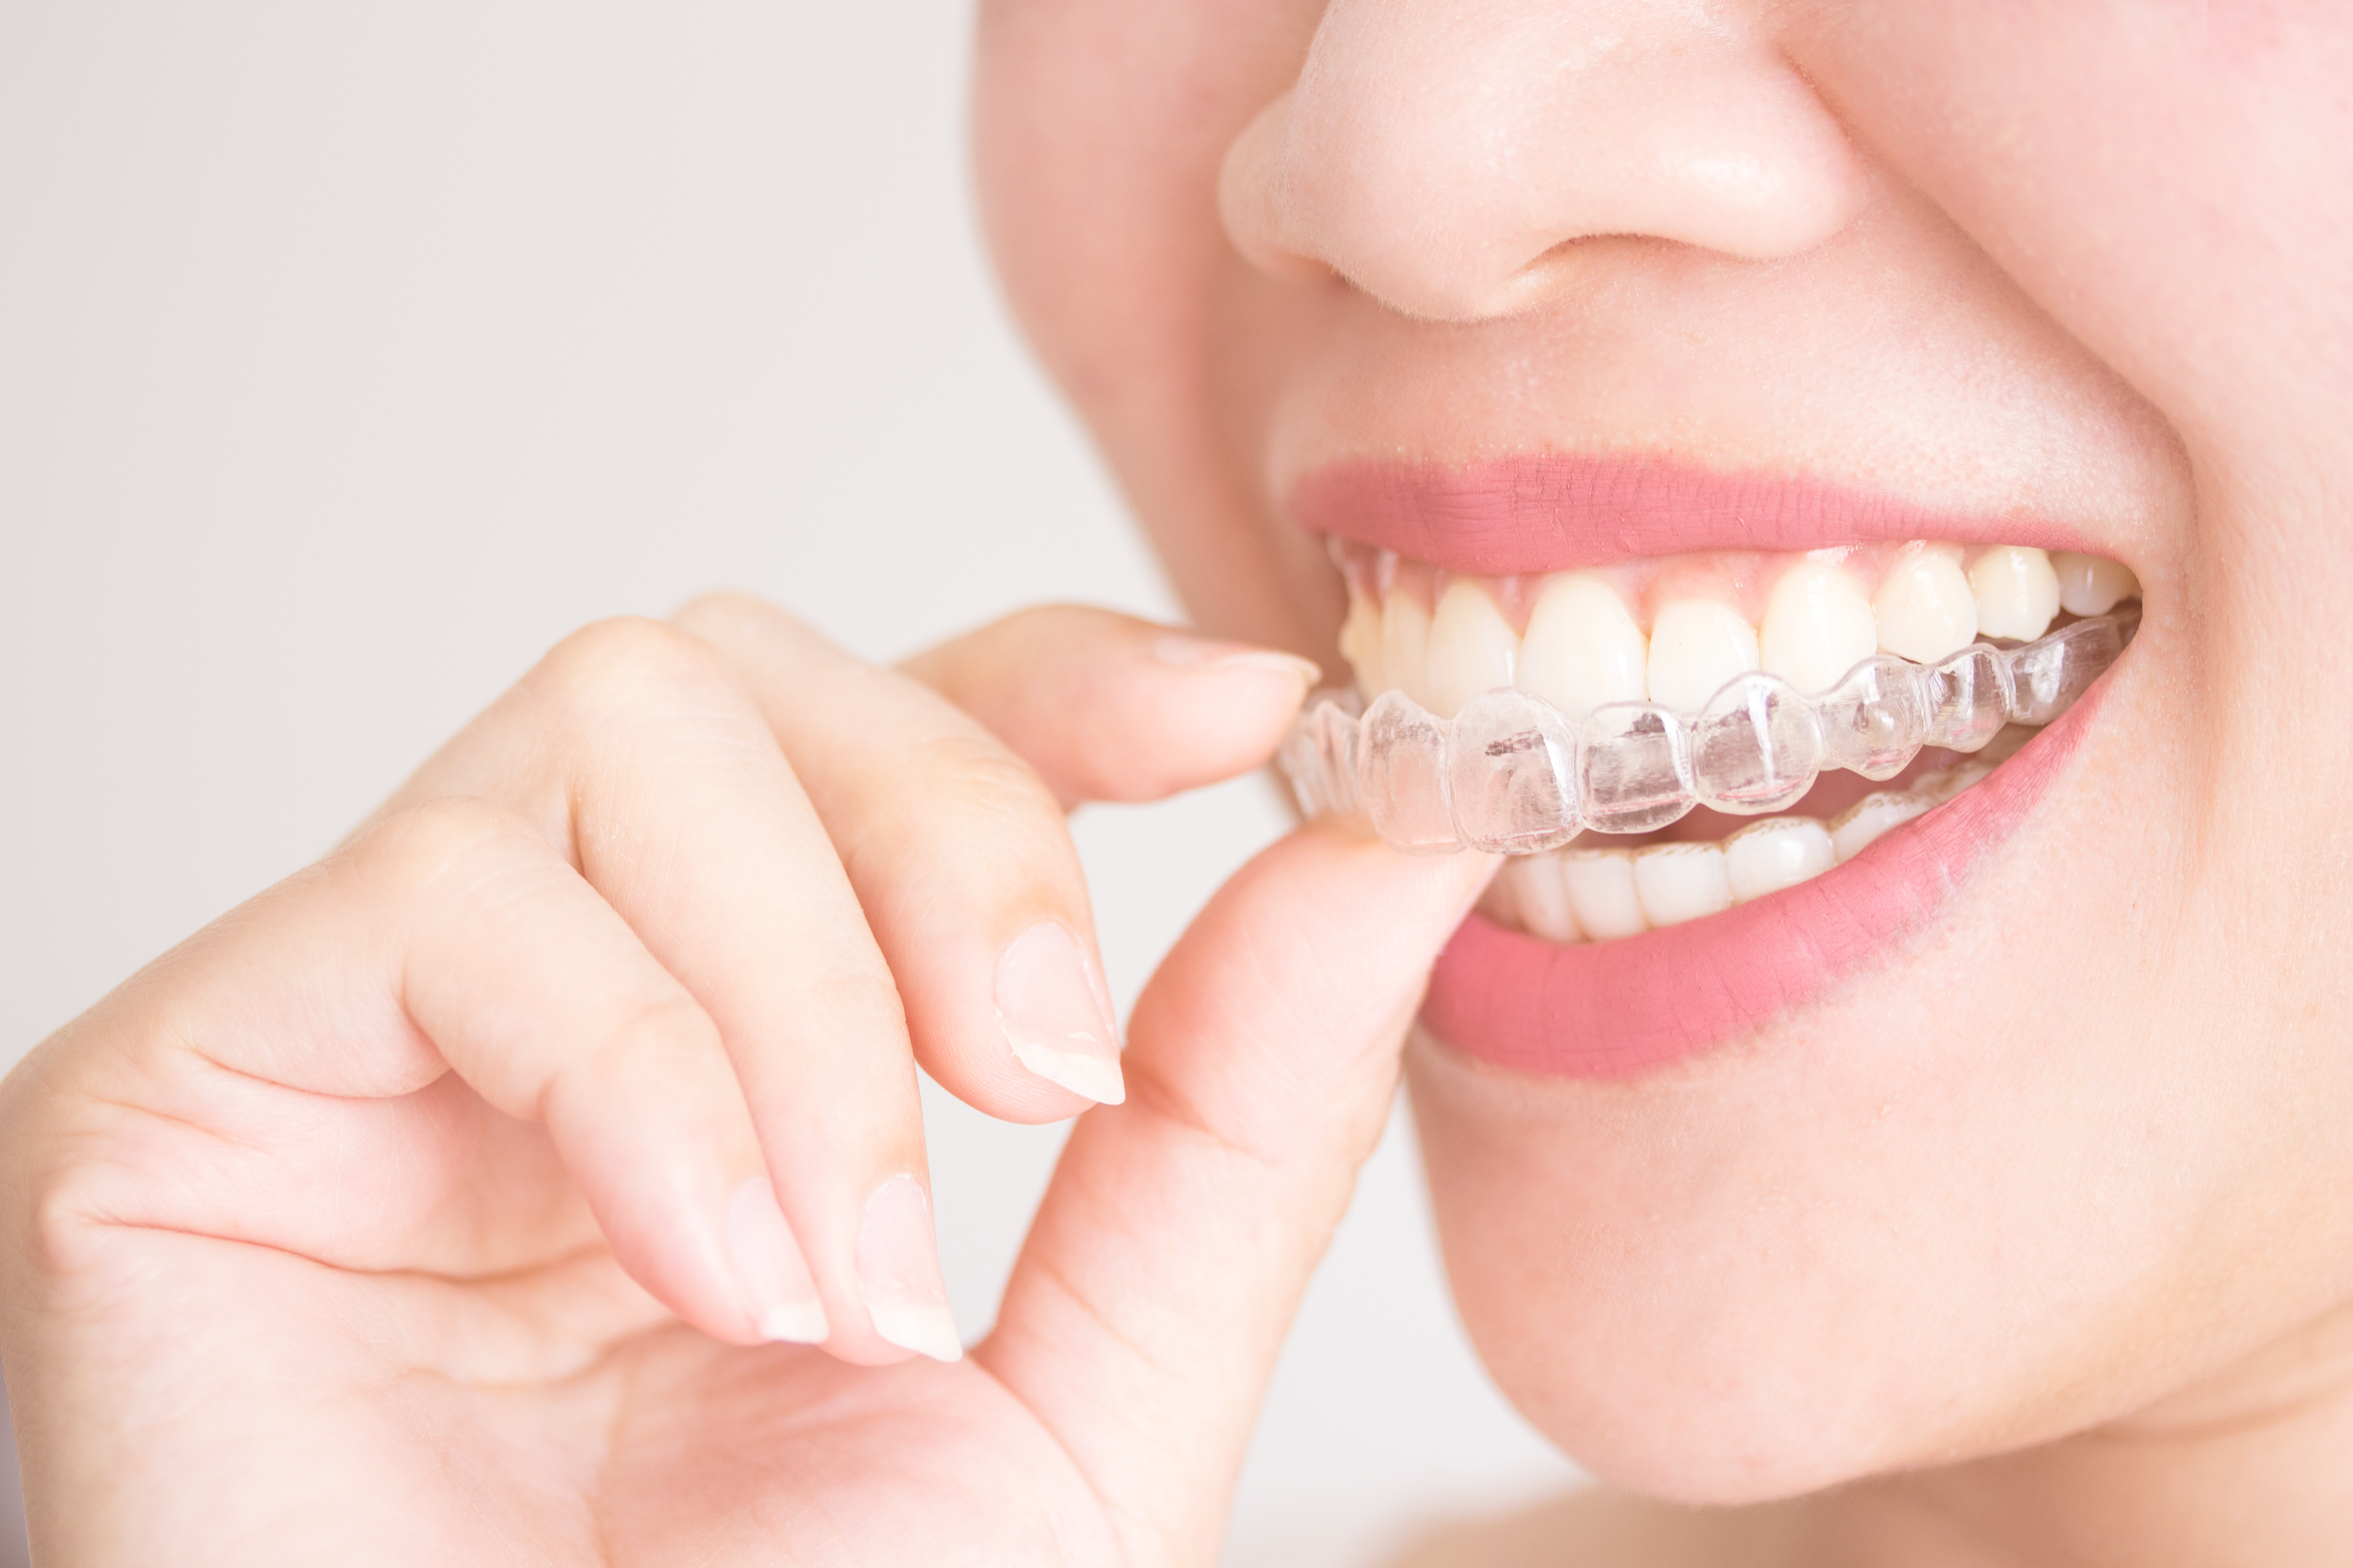 Basic aspects about the teeth clear aligners